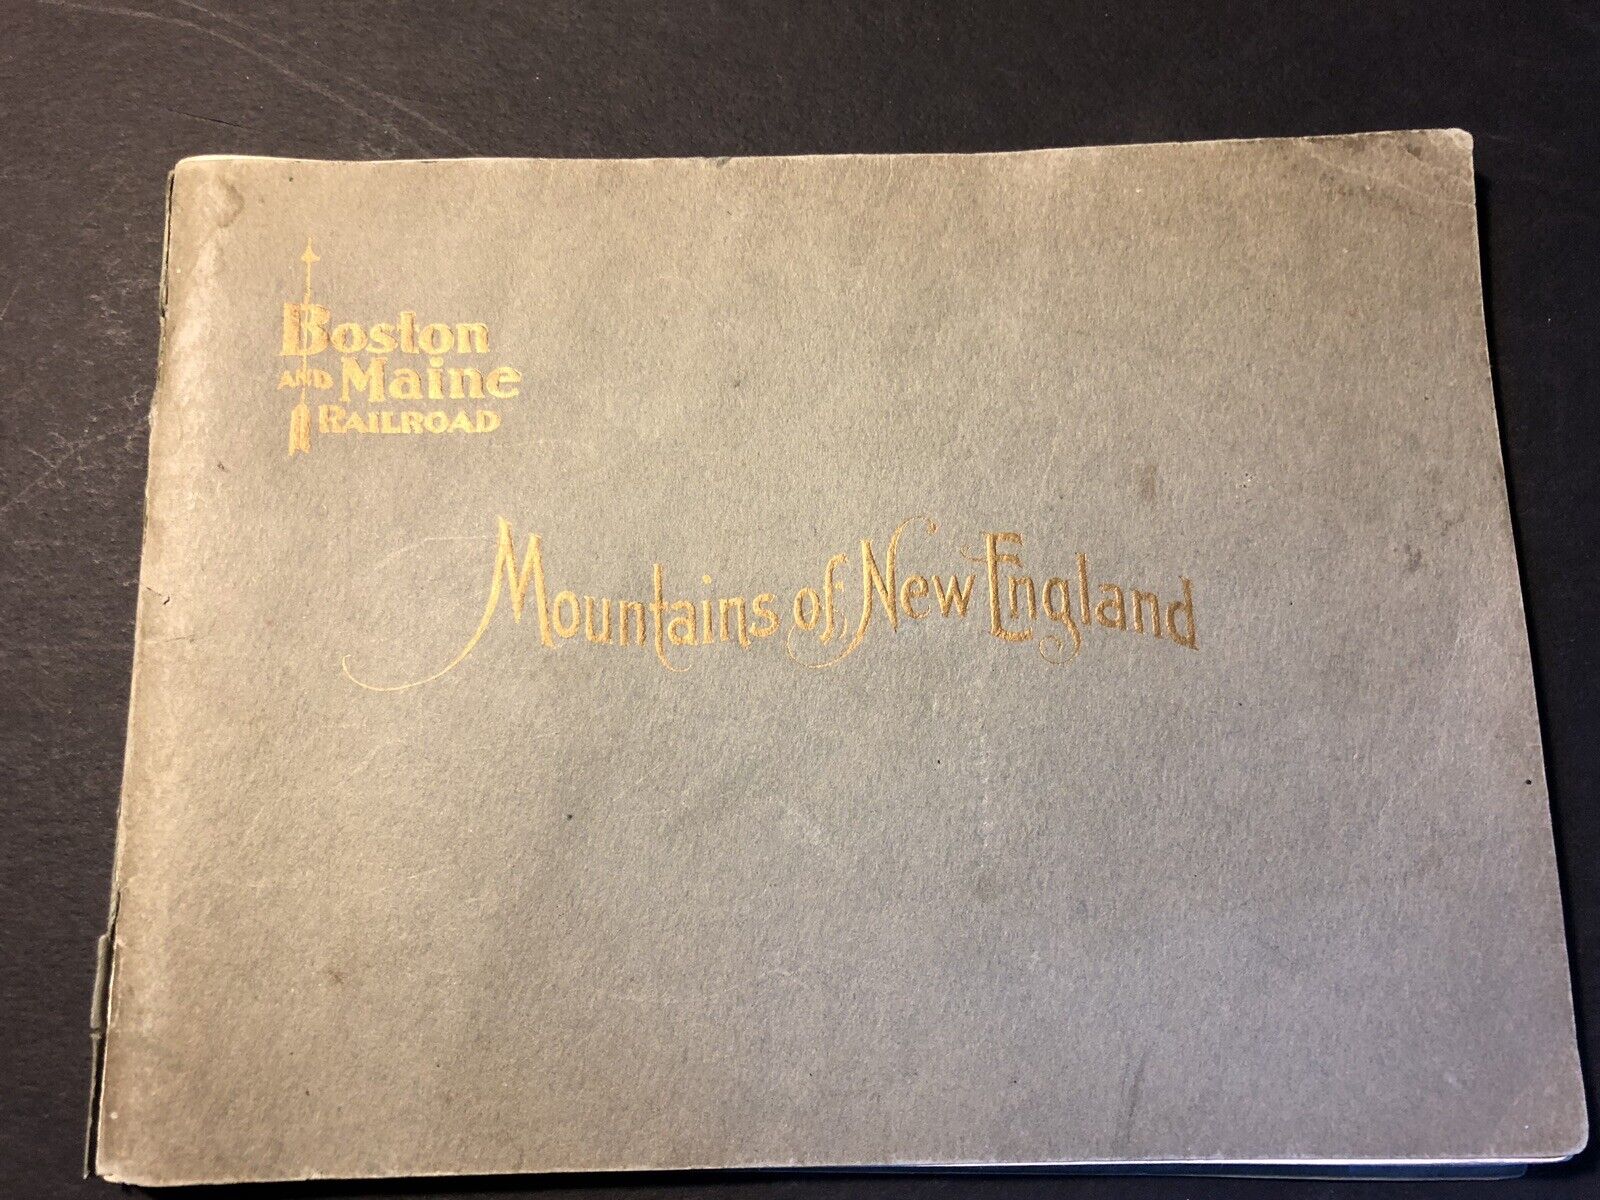 Vintage Boston And Maine Railroad Booklet- Mountains Of New England